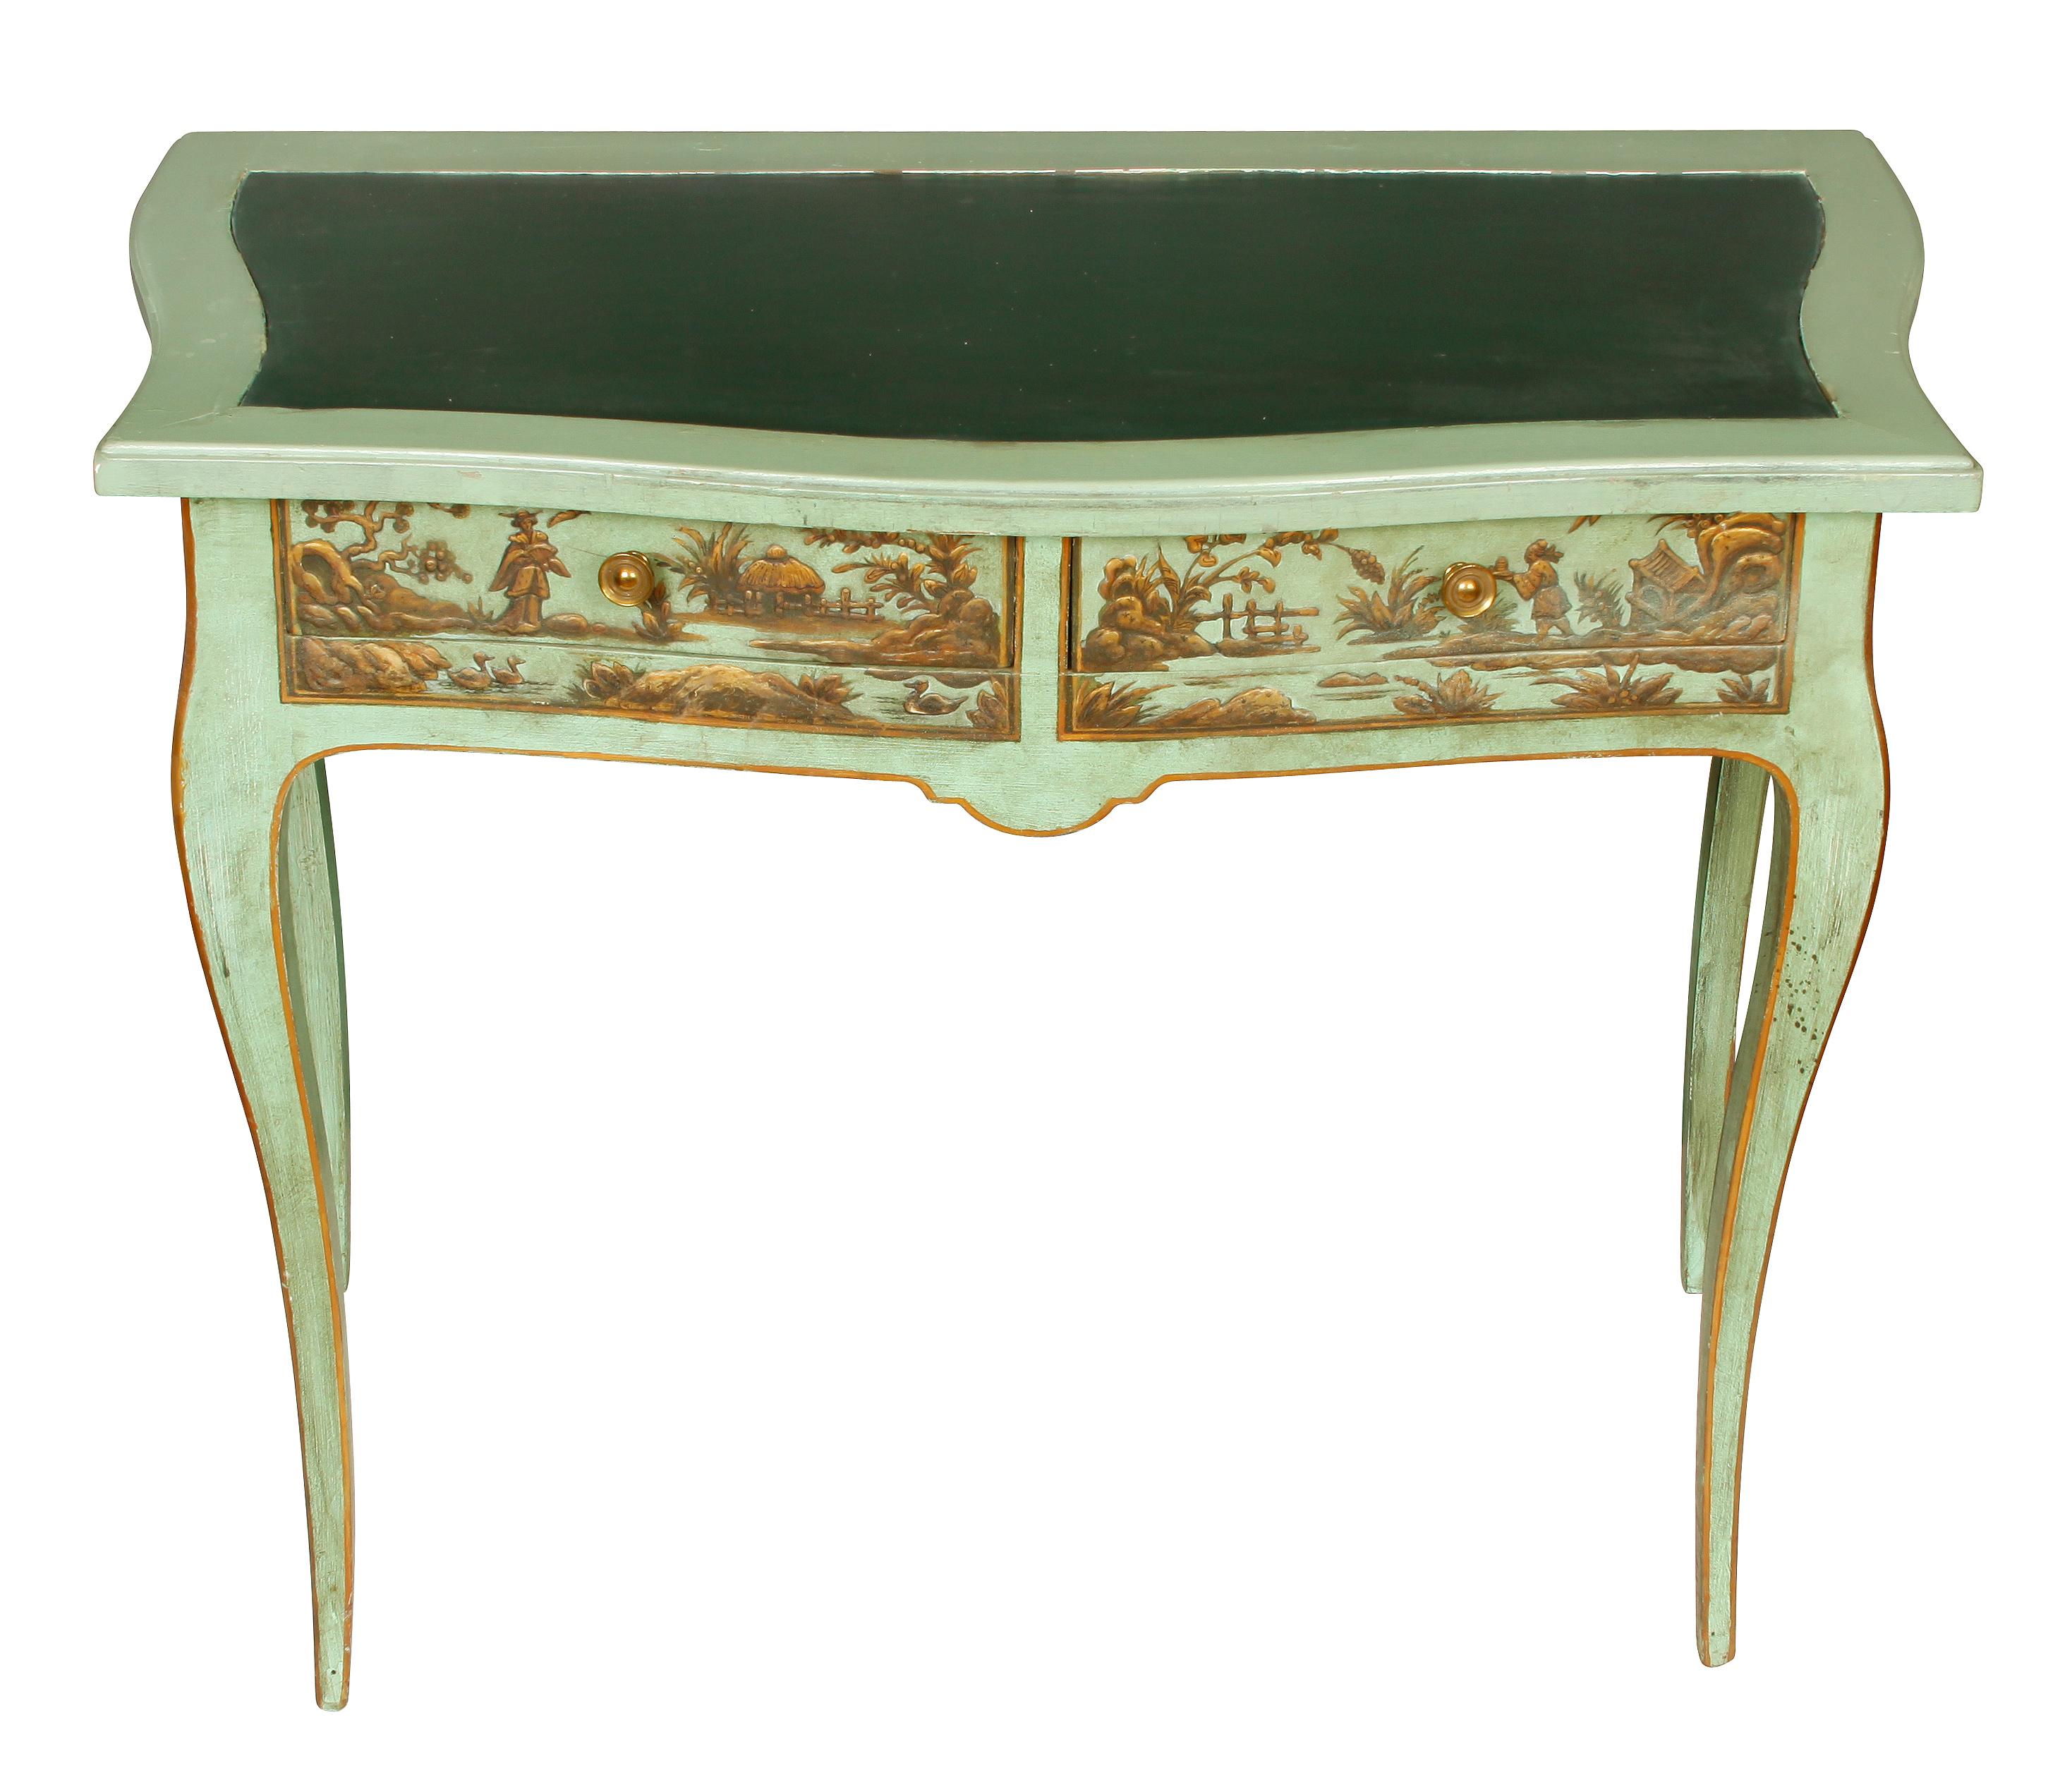 Hand-Painted Vintage Chinoiserie Decorated Writing Table